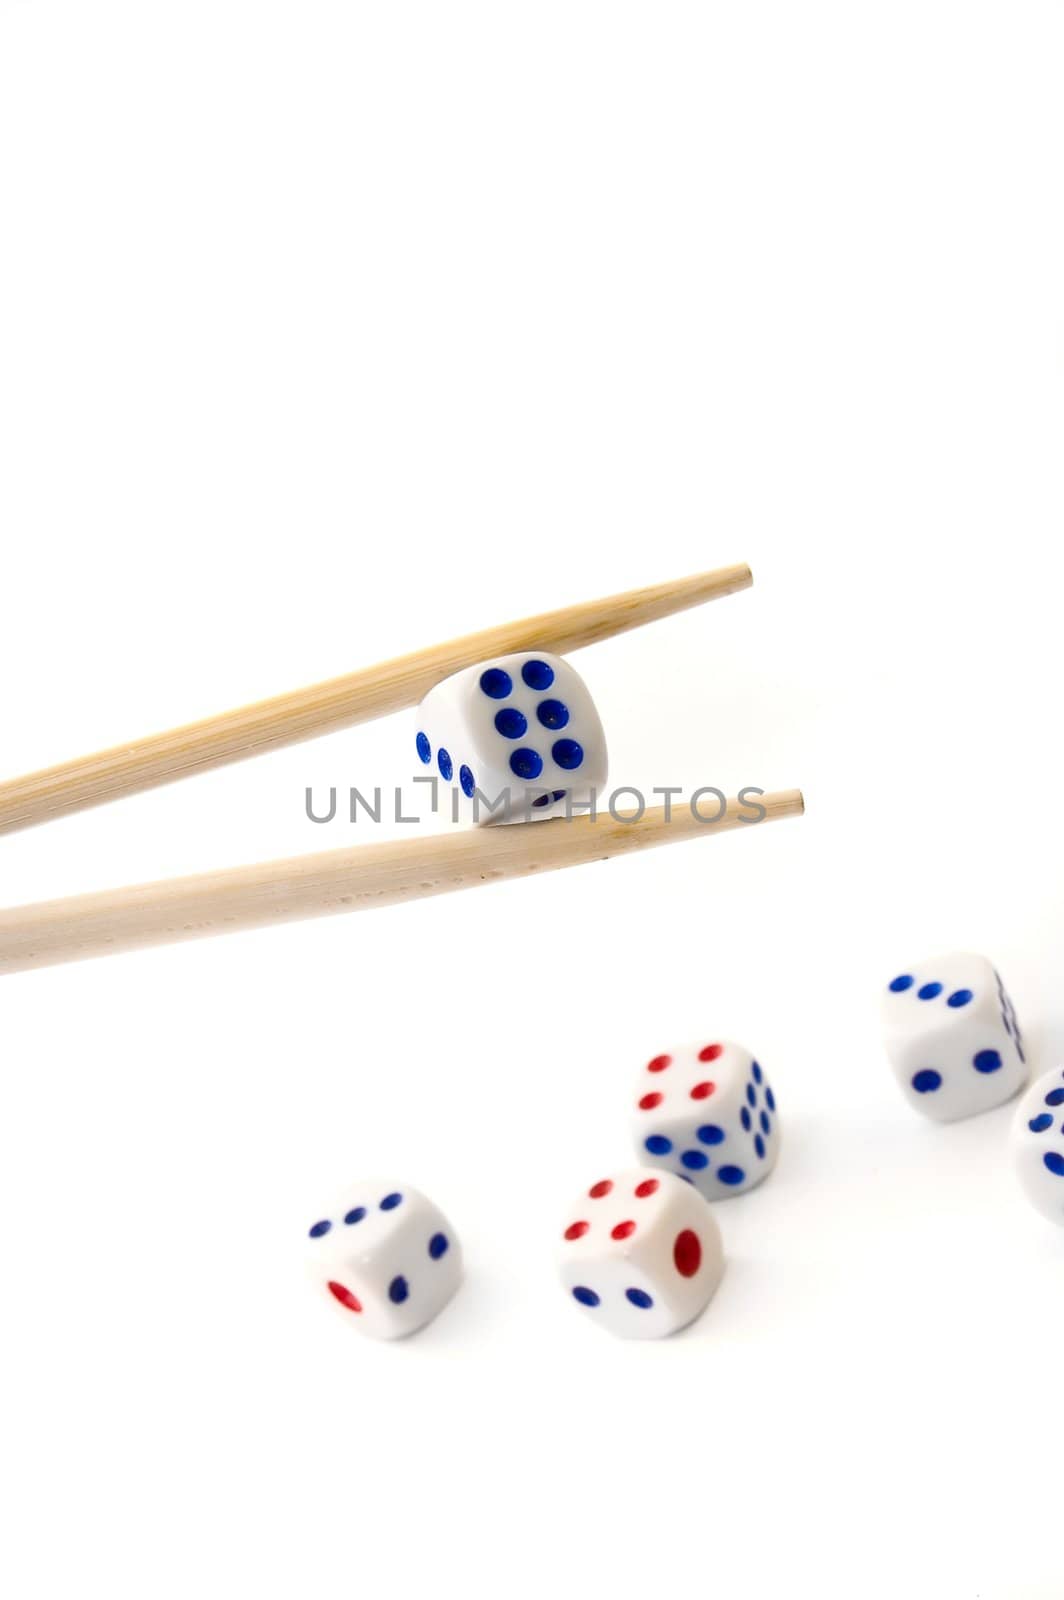 Chopsticks and dices on white background by rusak